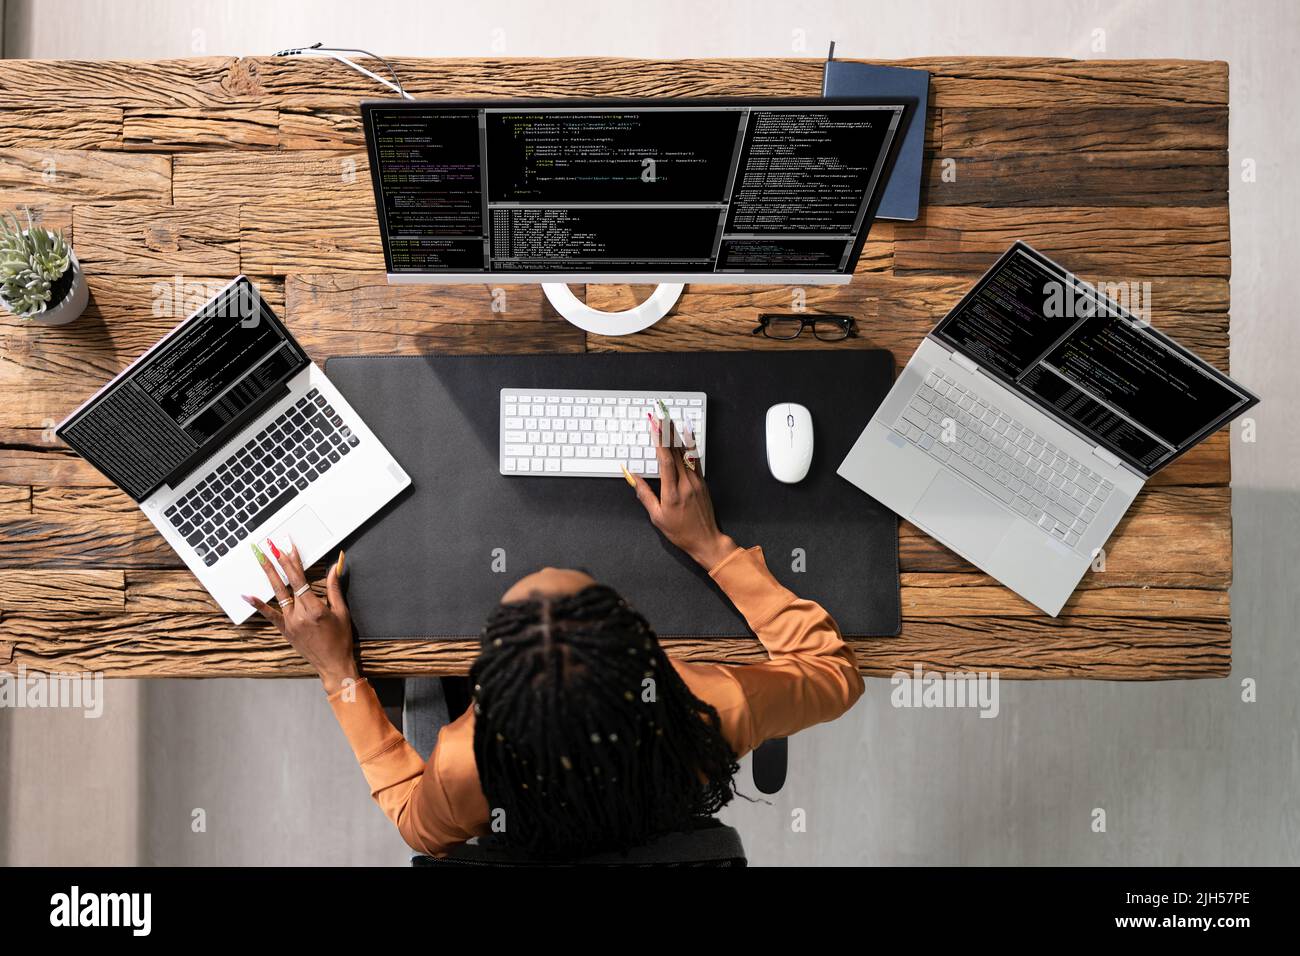 African American Programmer Woman Coding On Computer Stock Photo